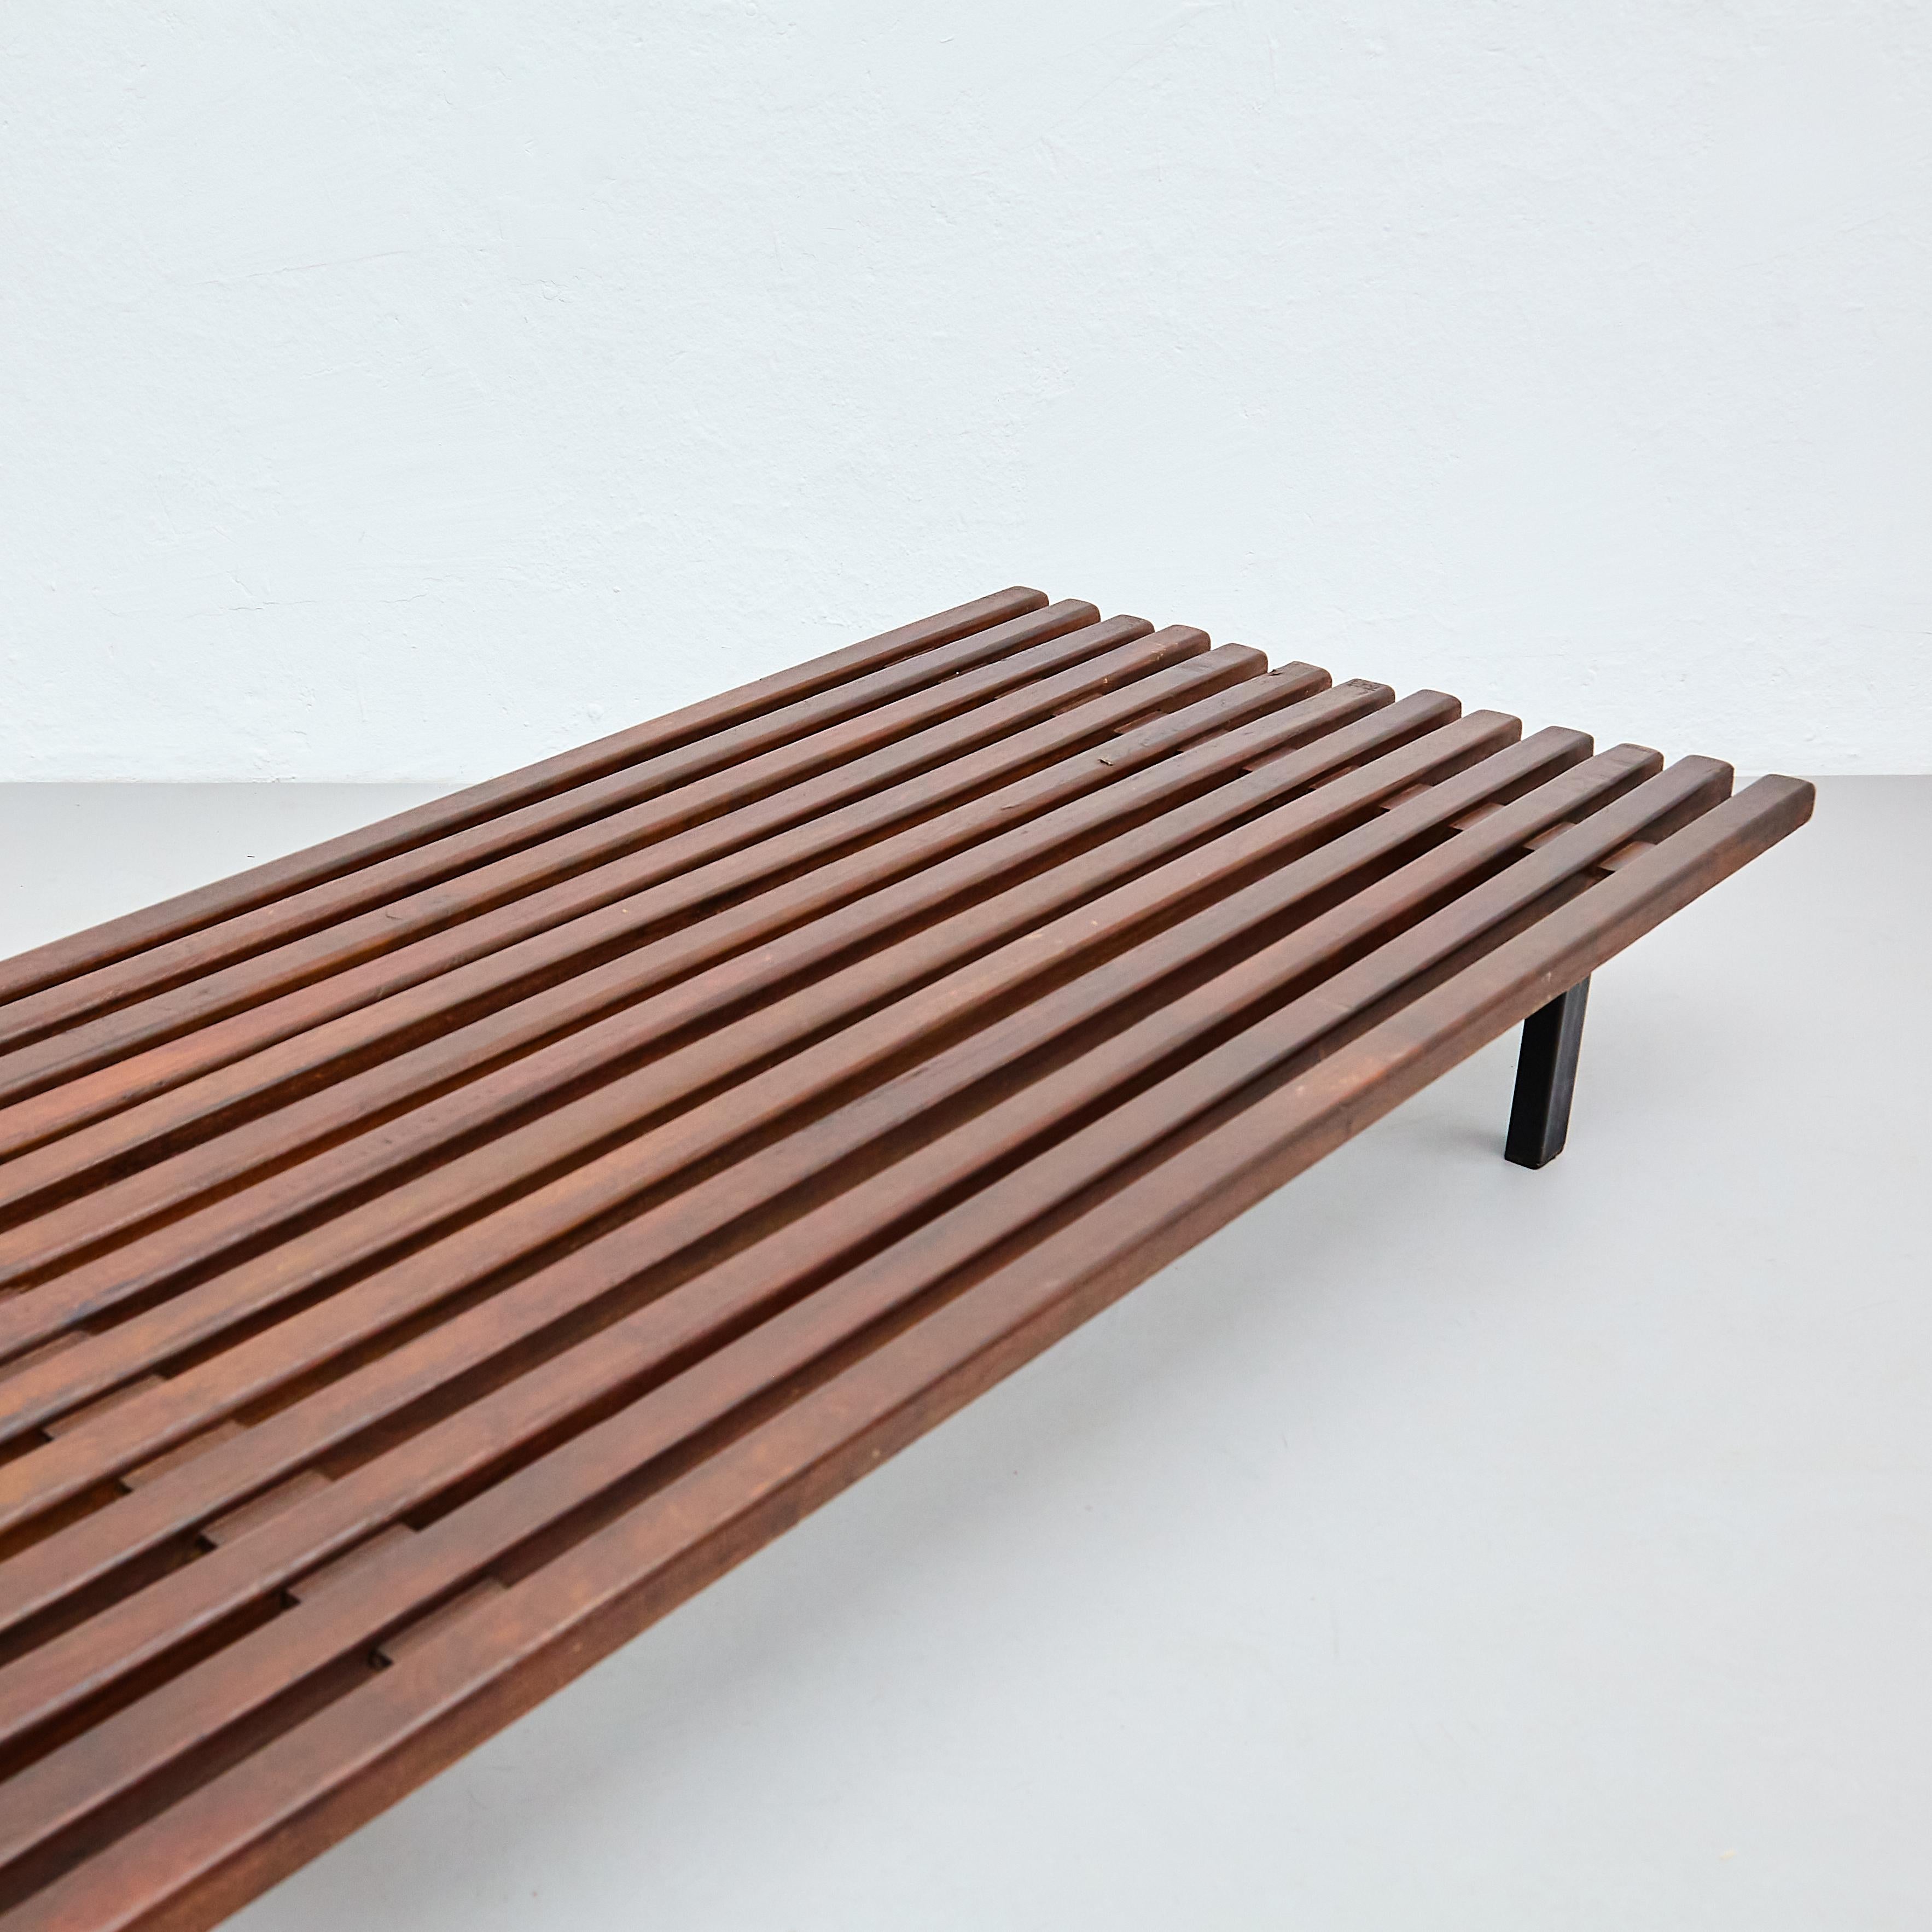 Metal Charlotte Perriand Mid-Century Modern Cansado Bench, circa 1950 For Sale